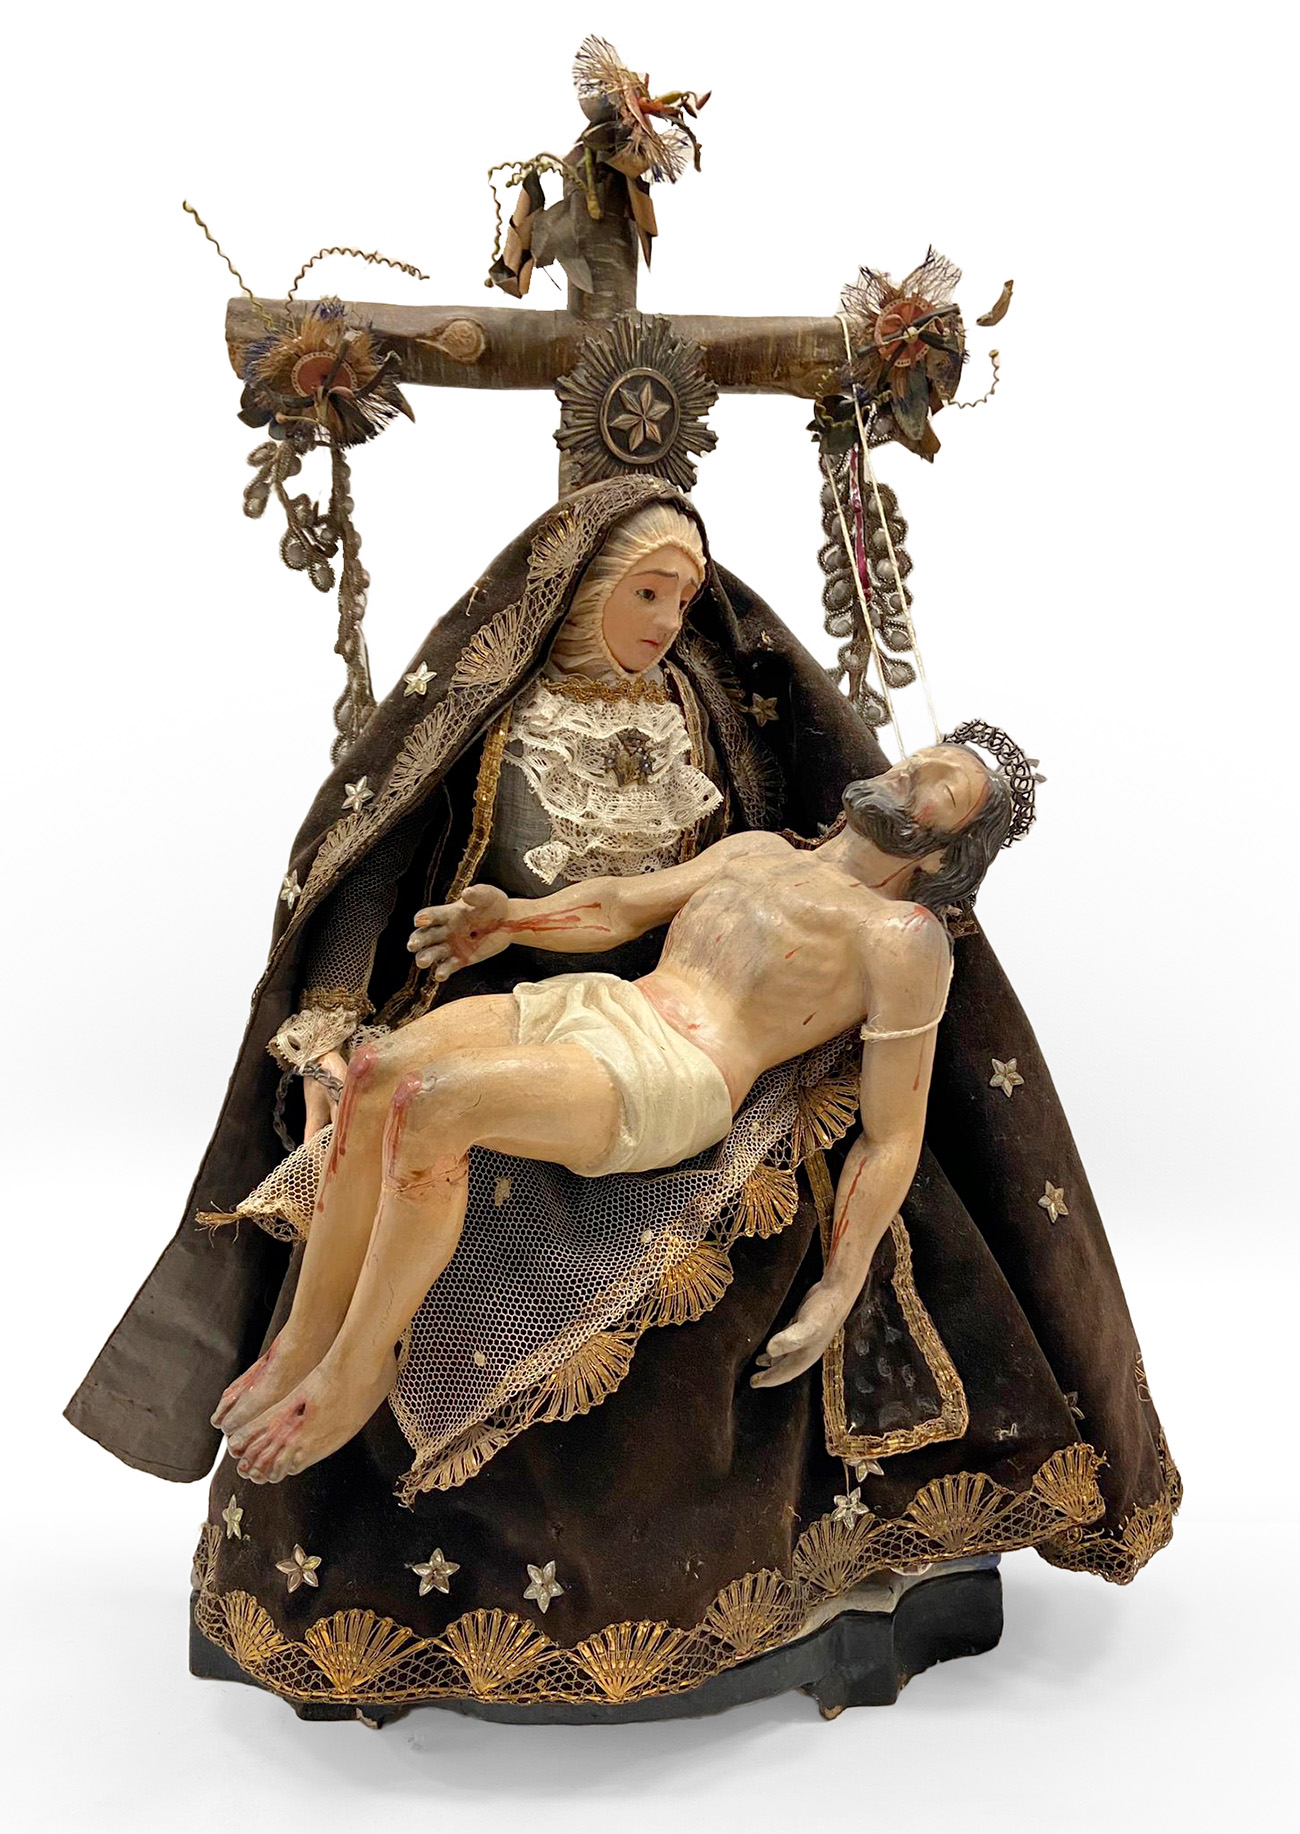 Dress carving or capipota of the Pietà. Cordovan school, 19th century.Carved and polychrome wood.